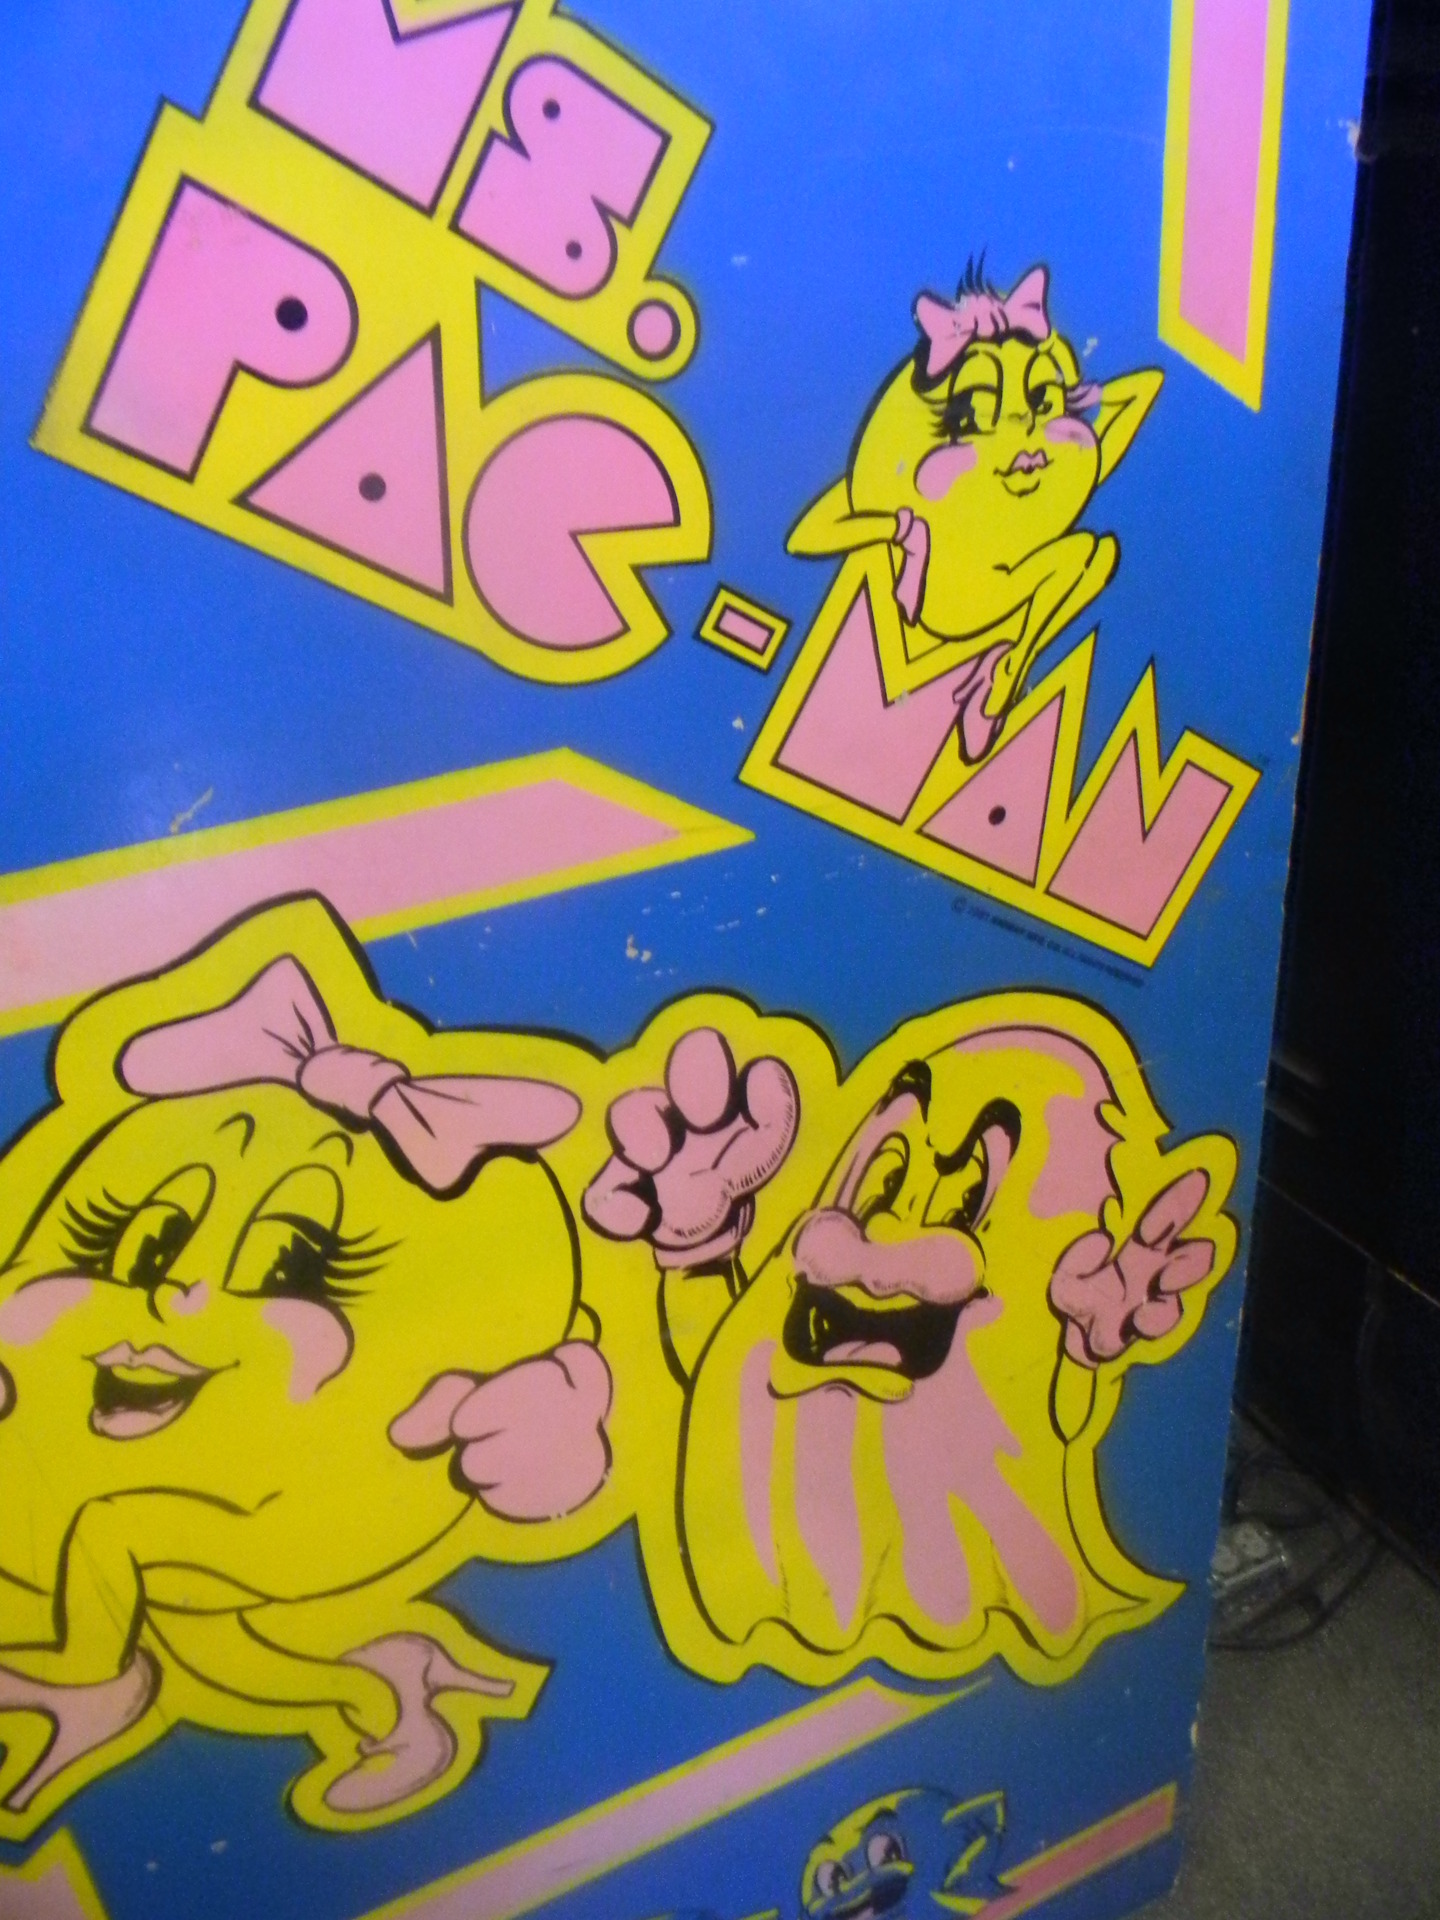 Now that I look at this Ms Pac Man side art that ghost is kinda creepy